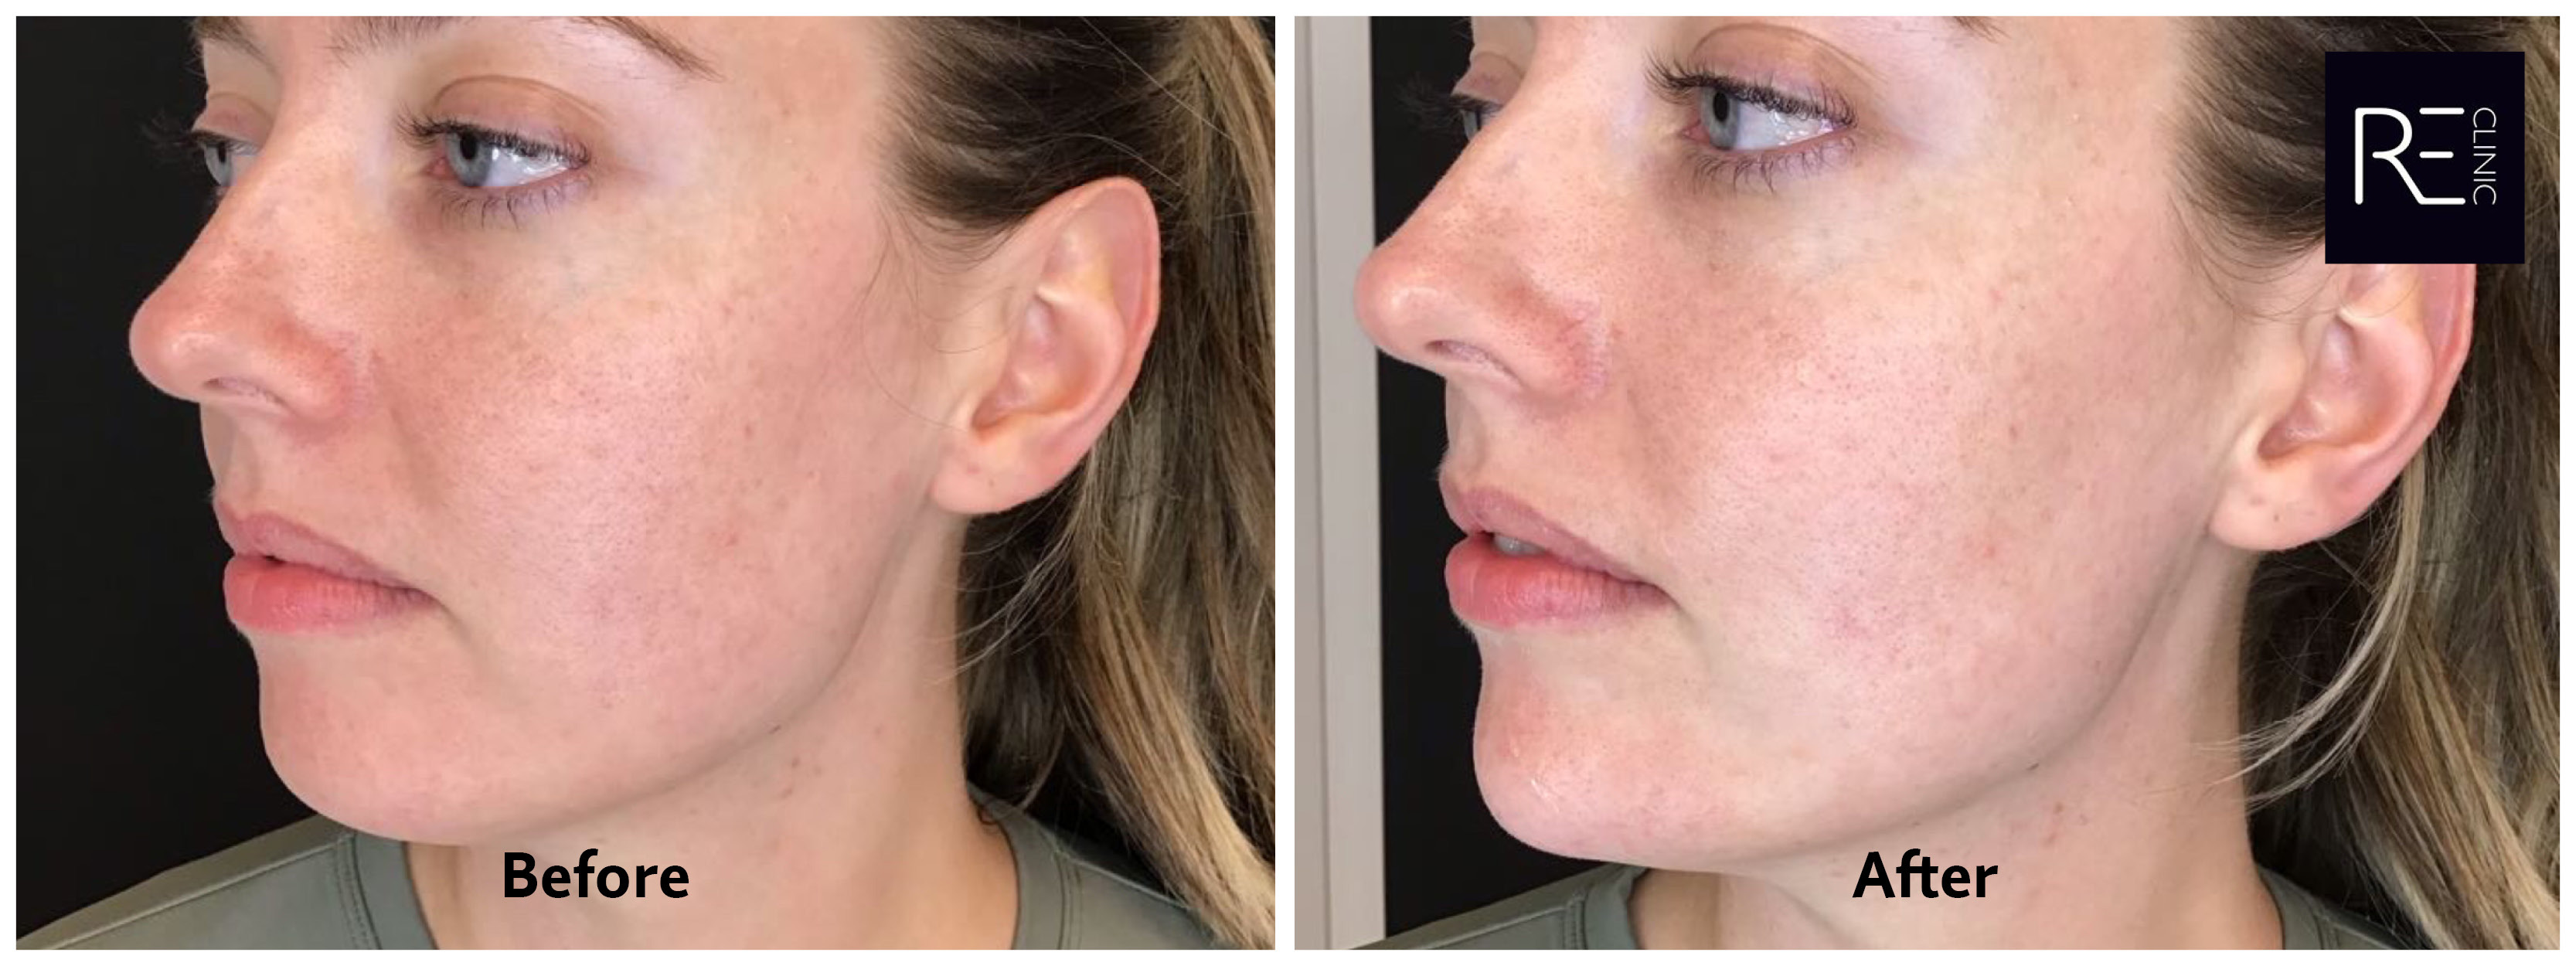 Chin Fillers Before and After at REclinic